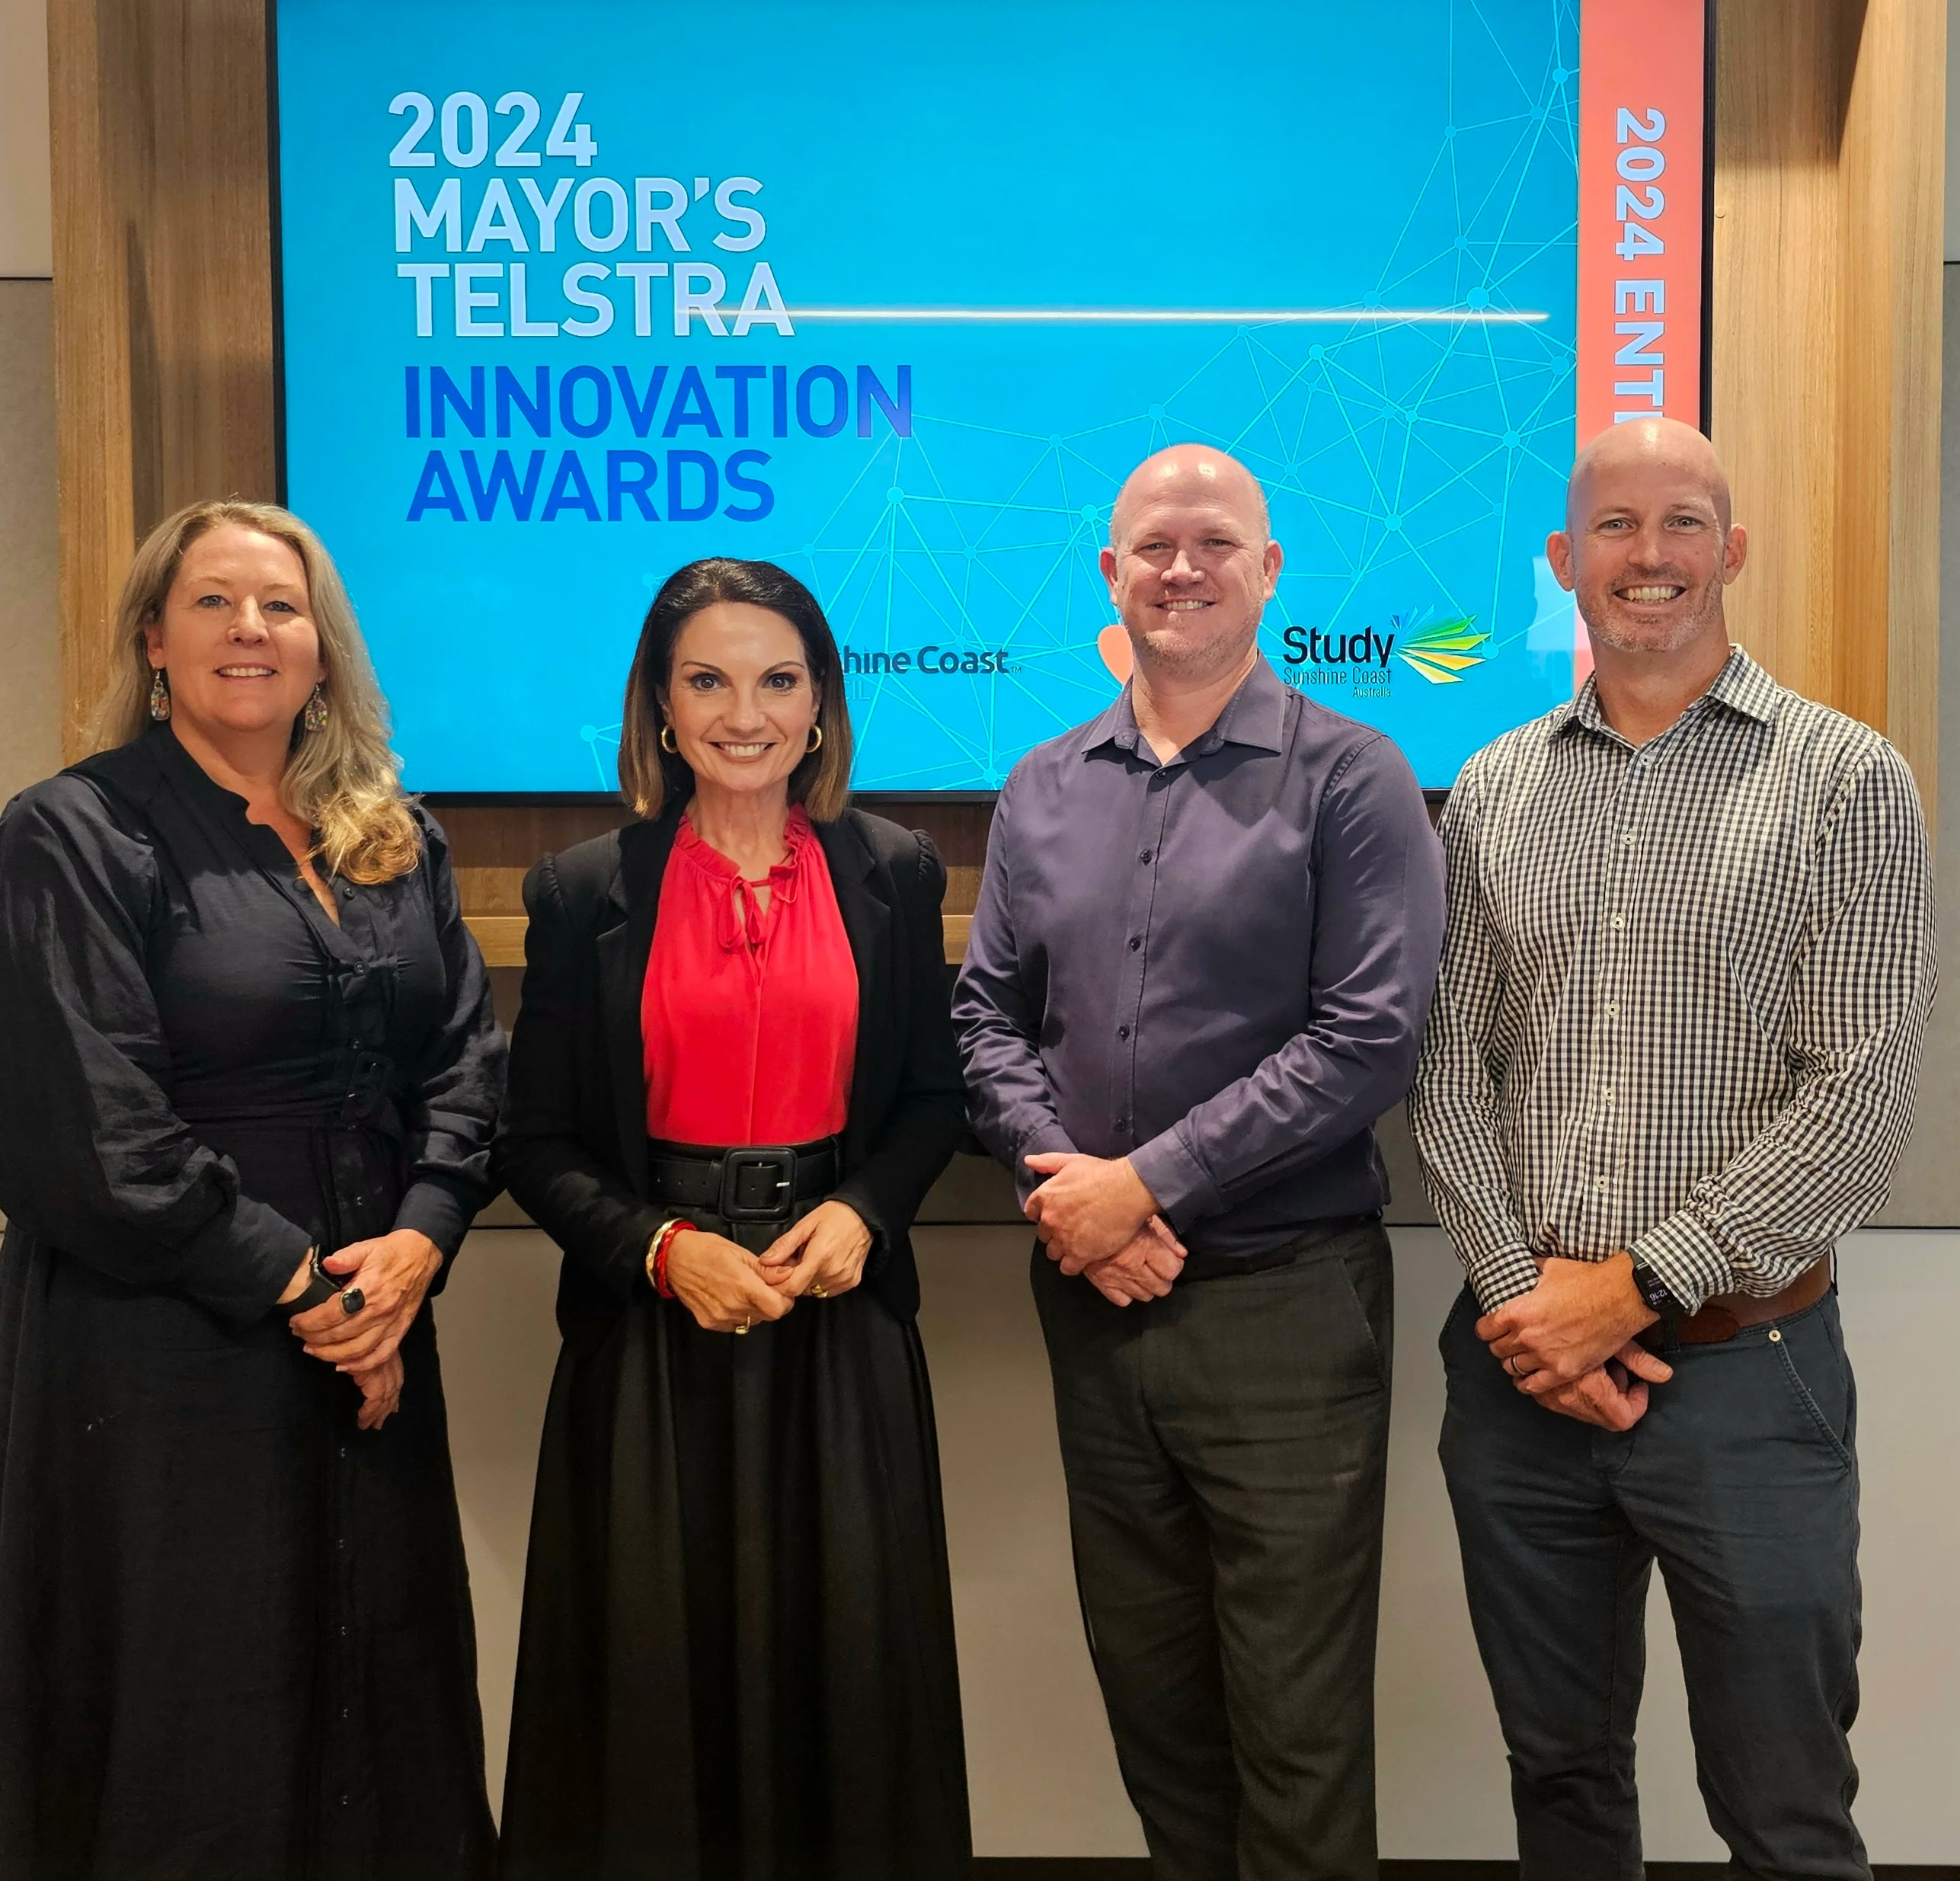 The judging panel from left to right: Grui Education program director Tara Jacobsen, Mayor Rosanna Natoli, Council Head of Business & Industry Development Tim McGee and Telstra Group Owner Digitisation Brent McArthur.